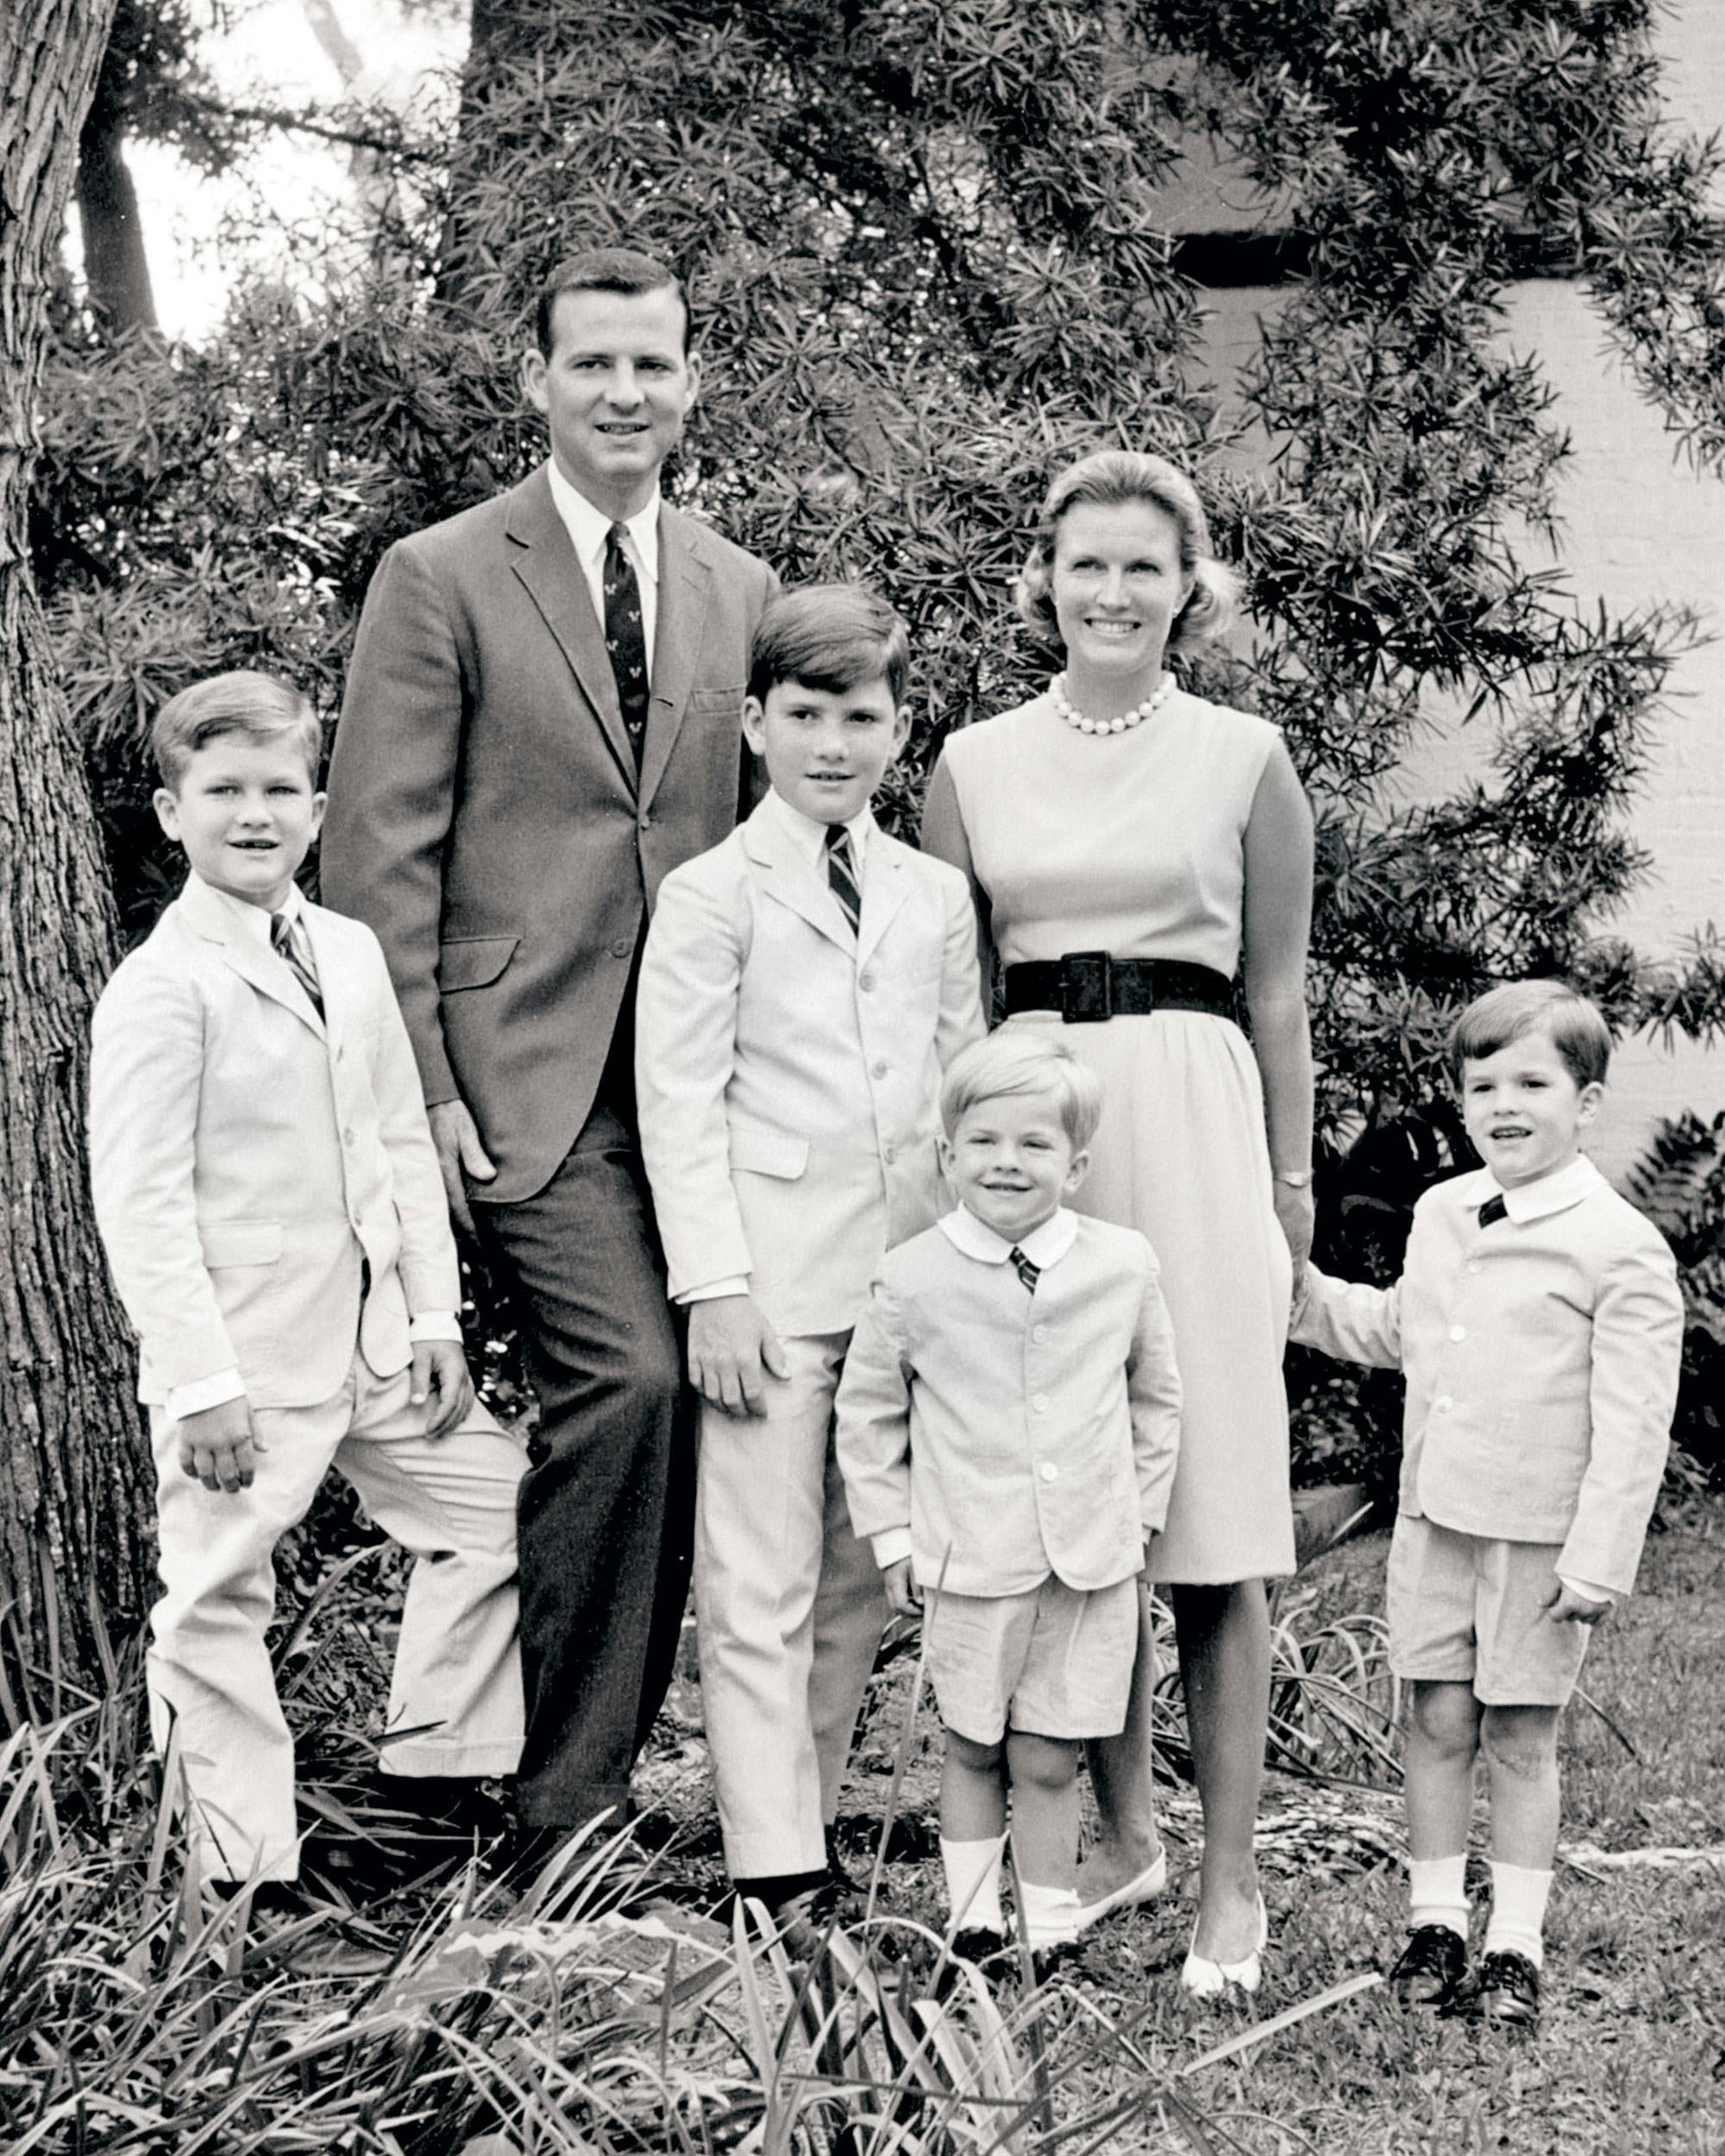 James and Mary Stuart Baker with their four boys in Houston in 1964.